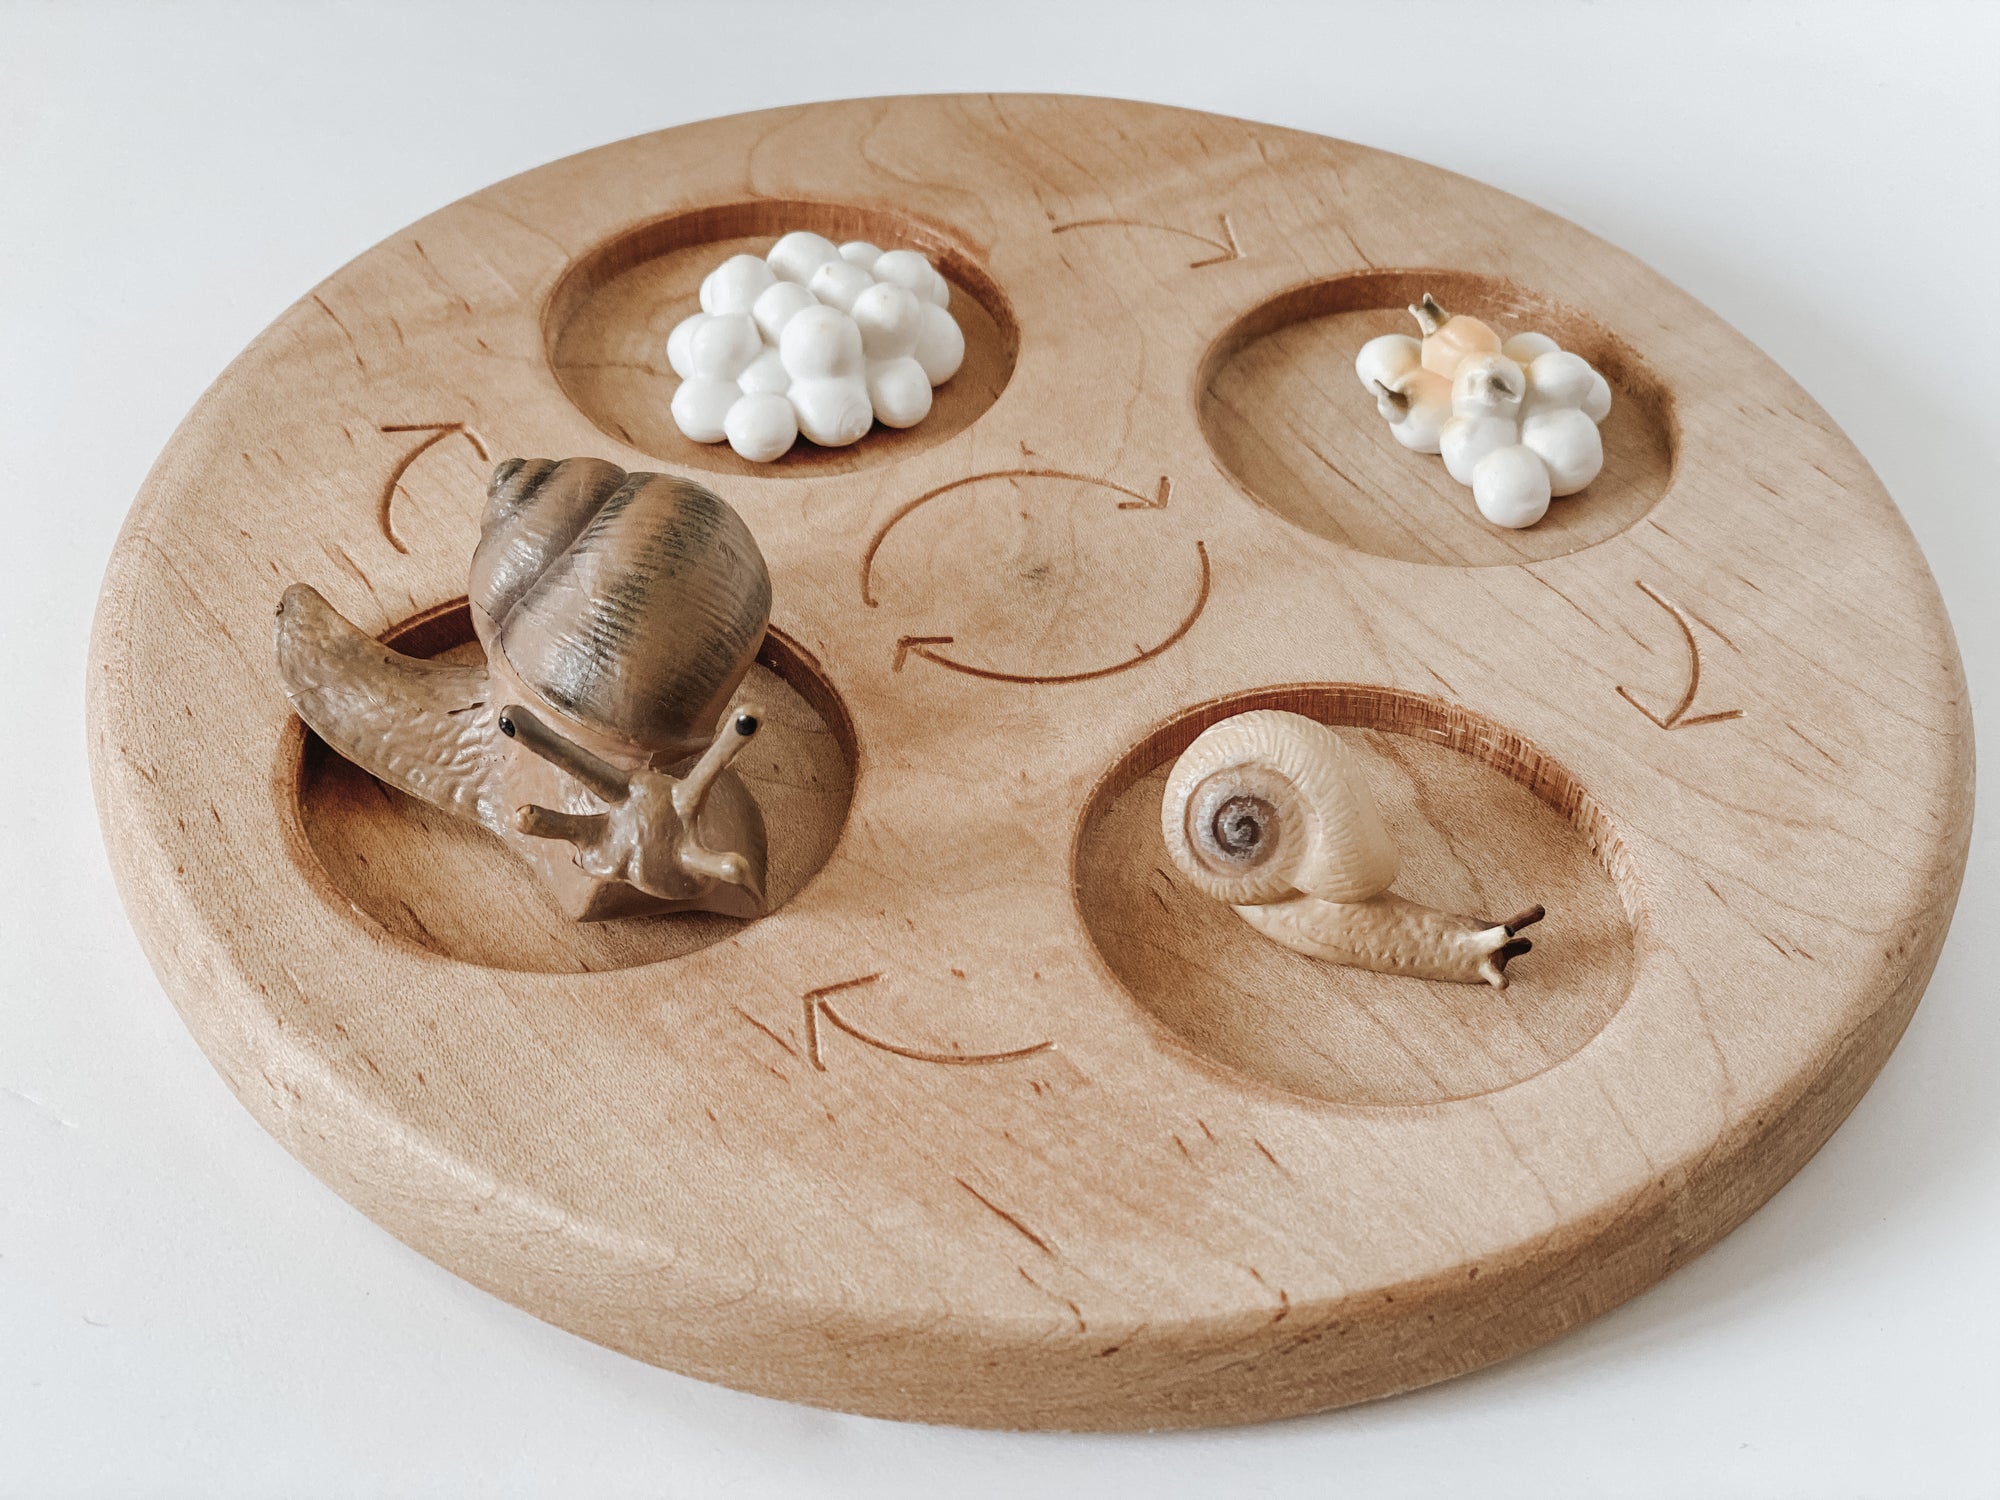 Snail Life Cycle Figurines